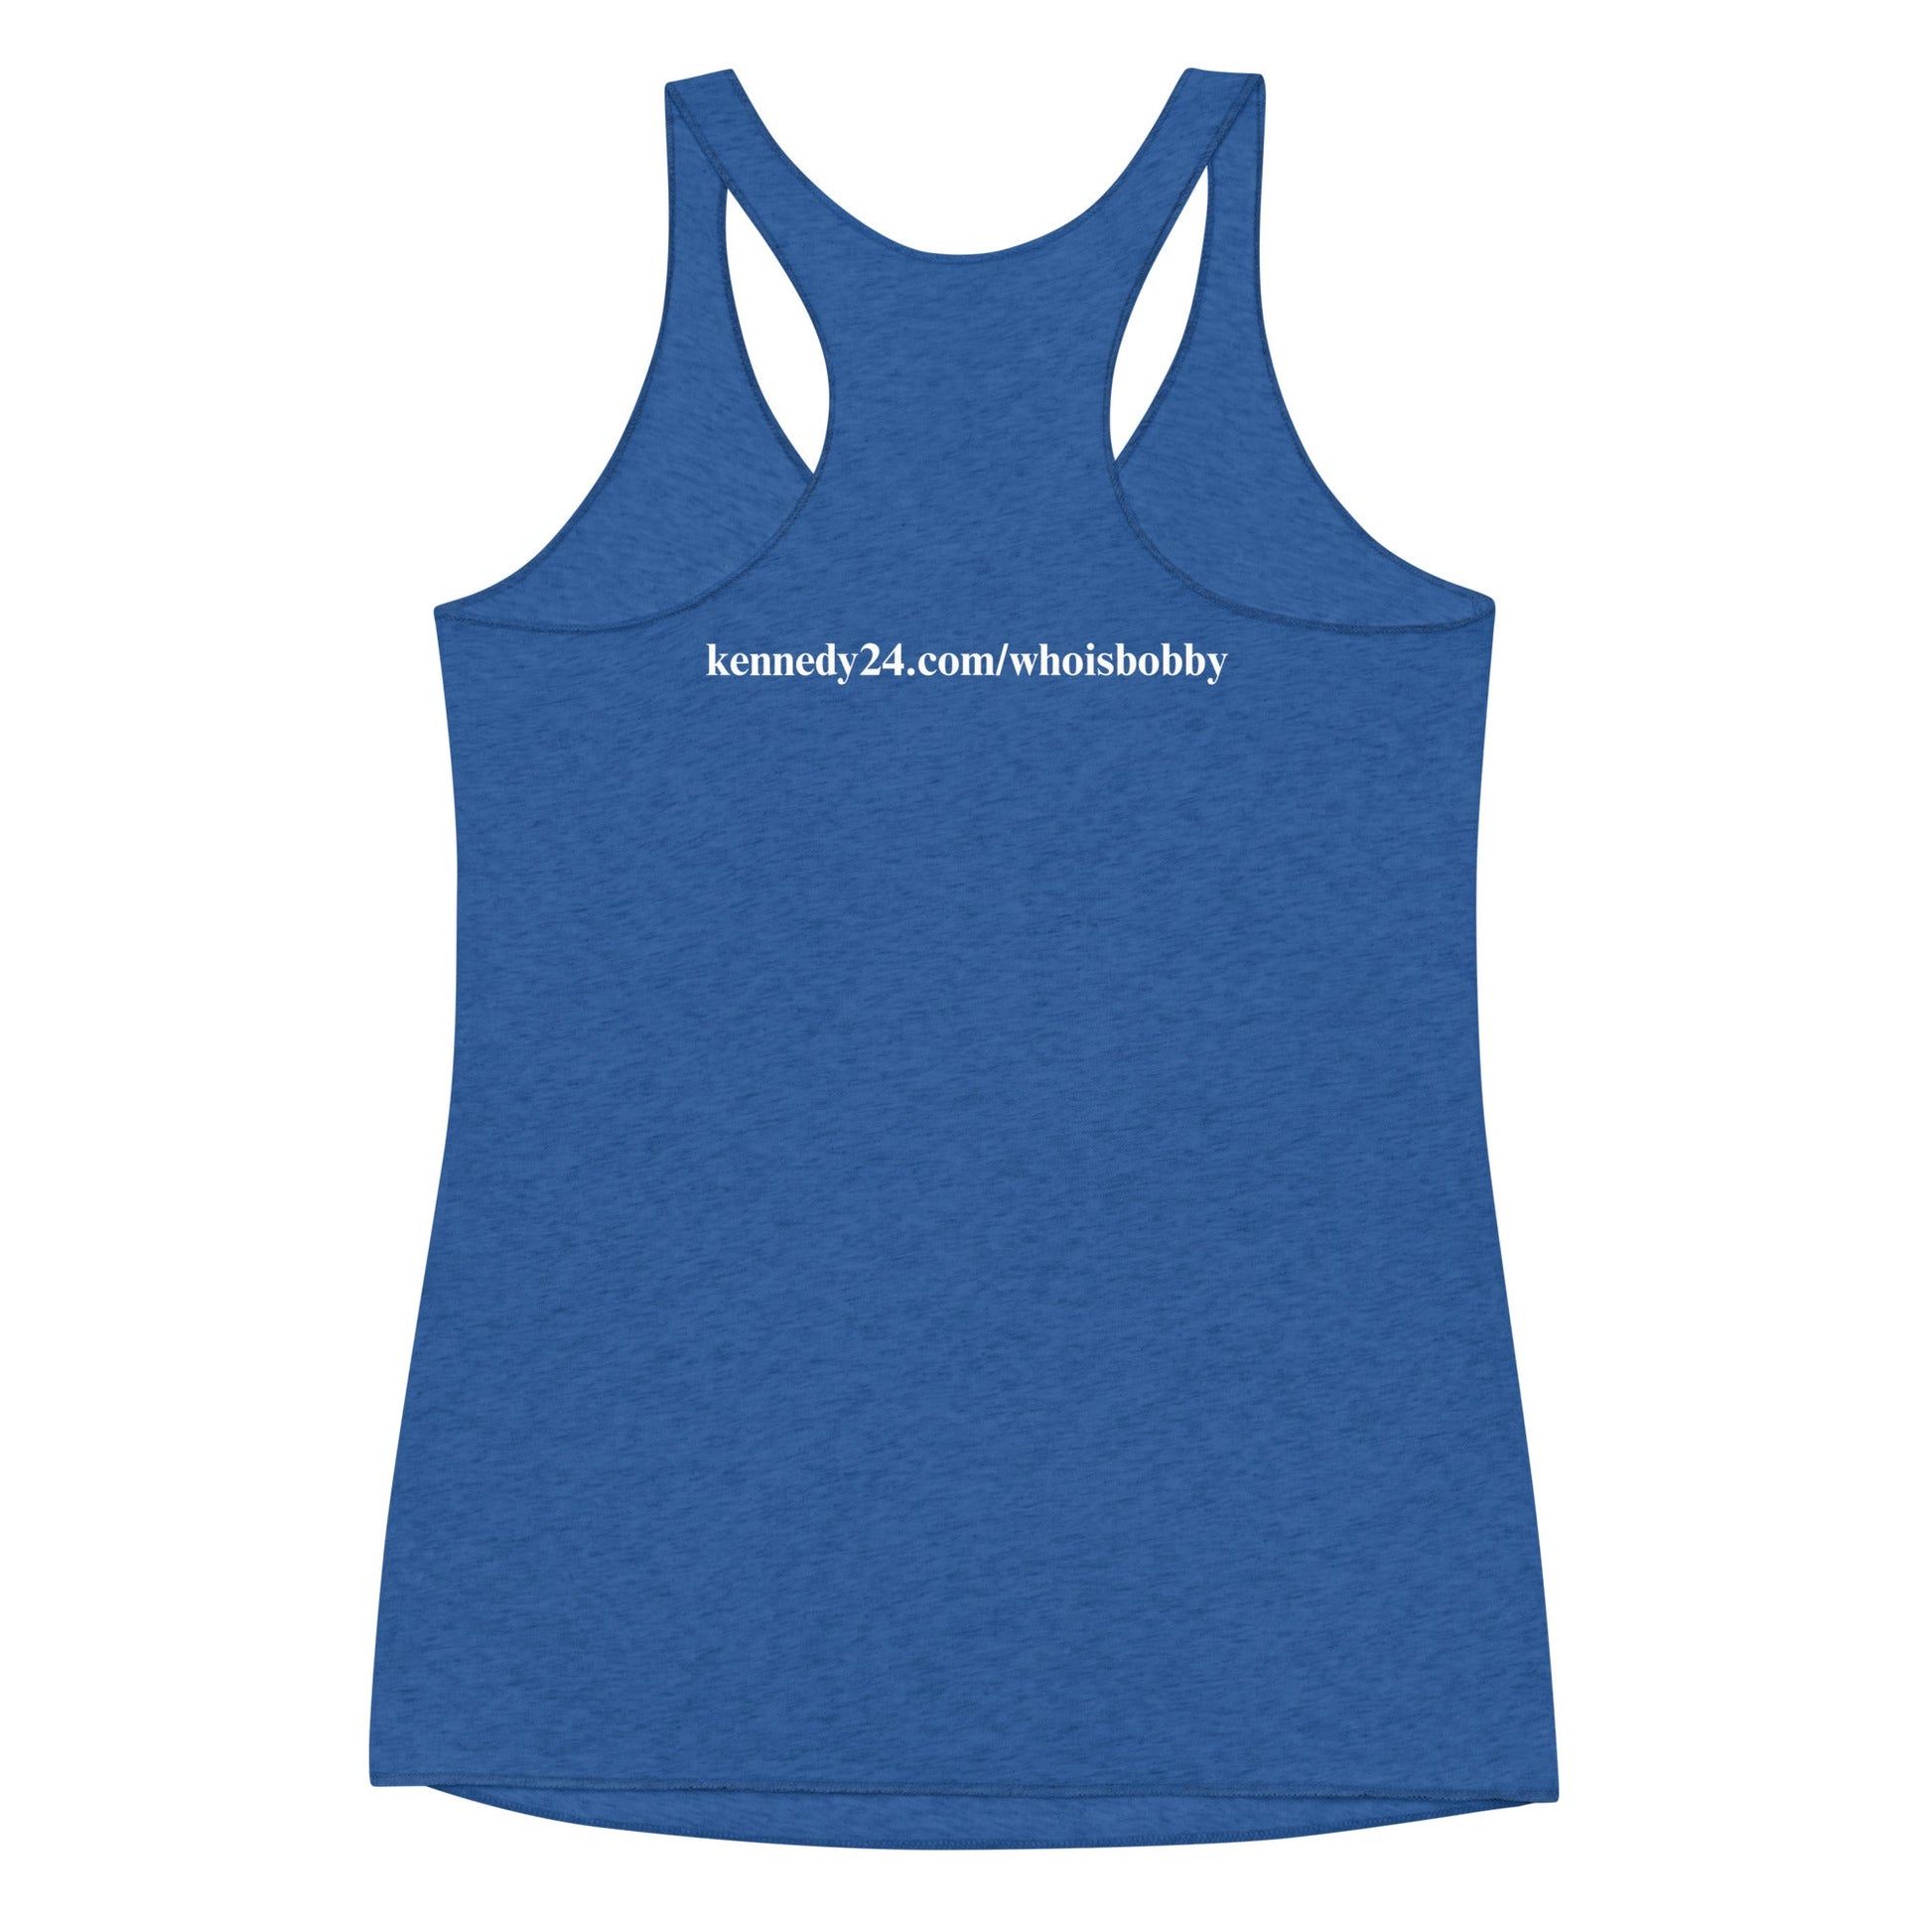 Who is RFK Jr? Women's Racerback Tank - TEAM KENNEDY. All rights reserved